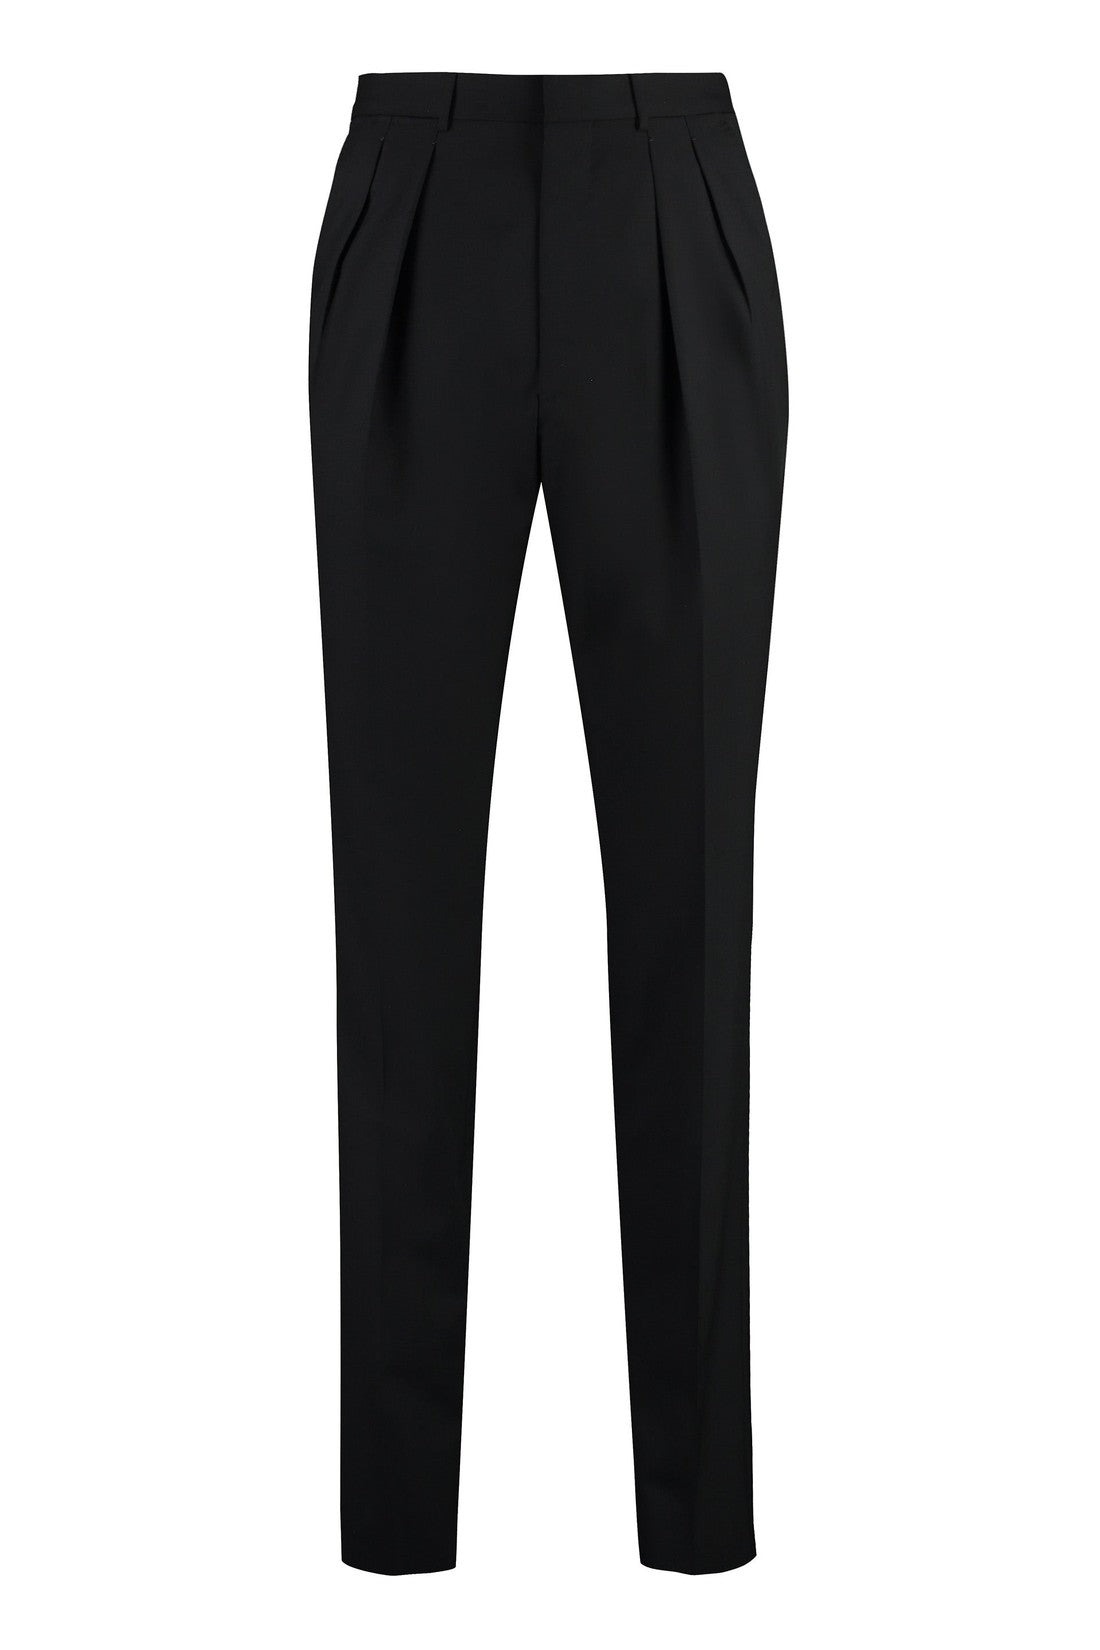 Tom Ford-OUTLET-SALE-Wool trousers-ARCHIVIST